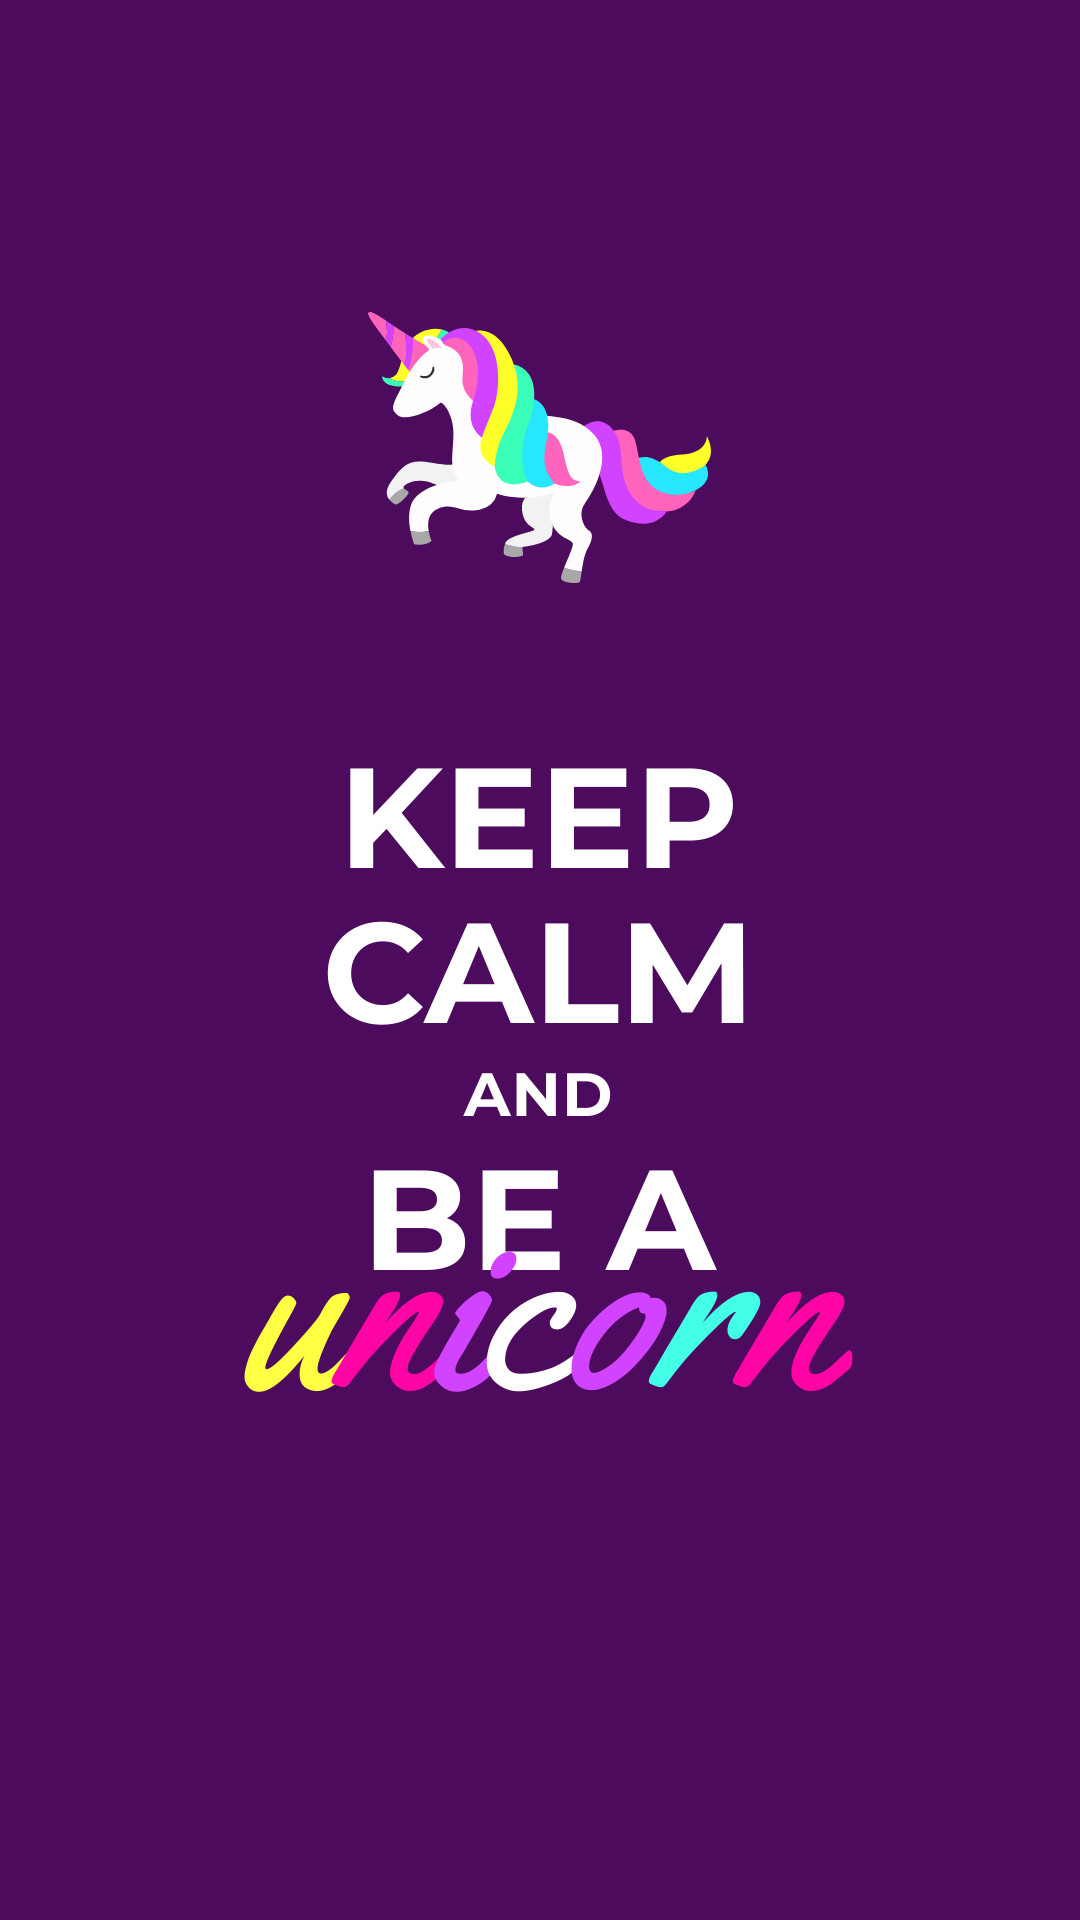 Keep Calm and Be a Unicorn Facebook Sponsored Message 1200x628